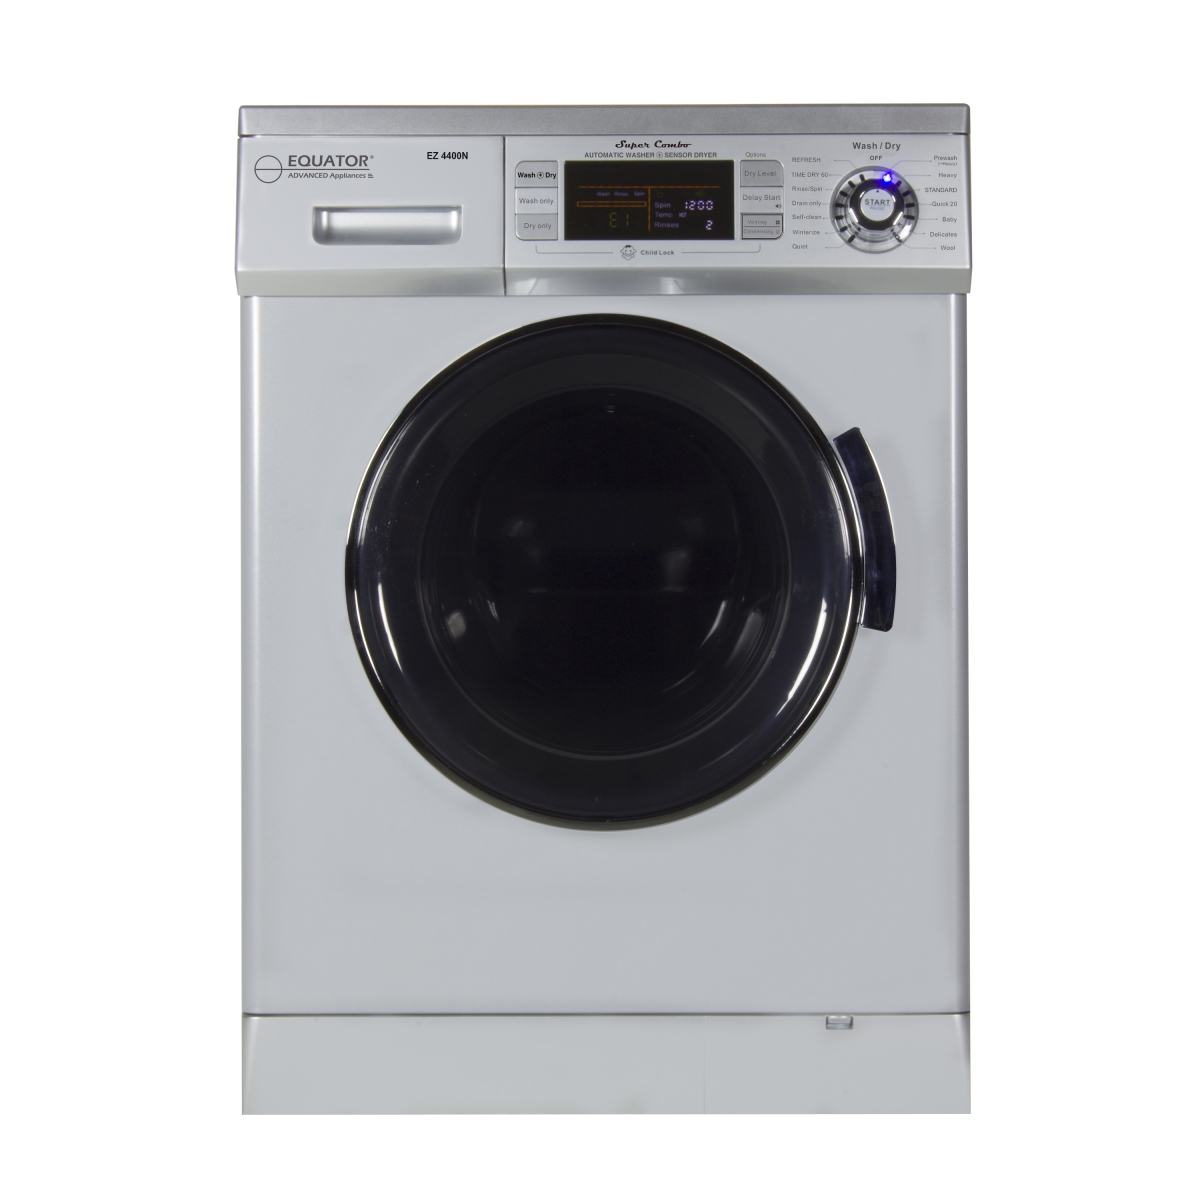 Ez4400 N Silver All-in-one Compact Convertible Combo Washer Dryer With Fully Digital, Silver